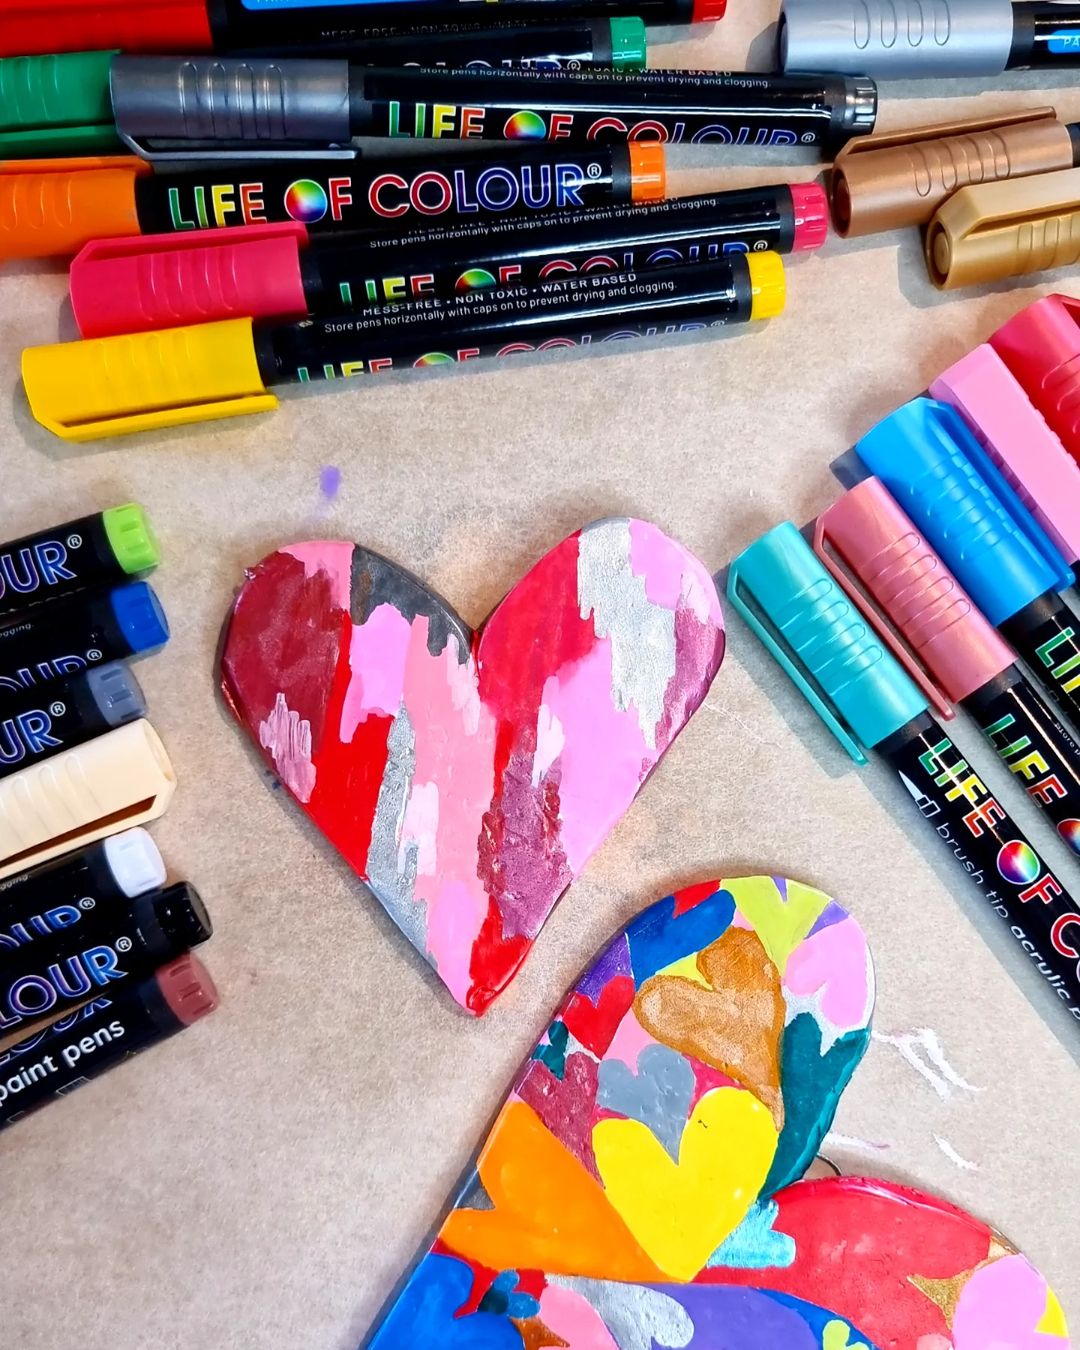 5 Glitter DIY ideas without the mess using paint pens - Life of Colour